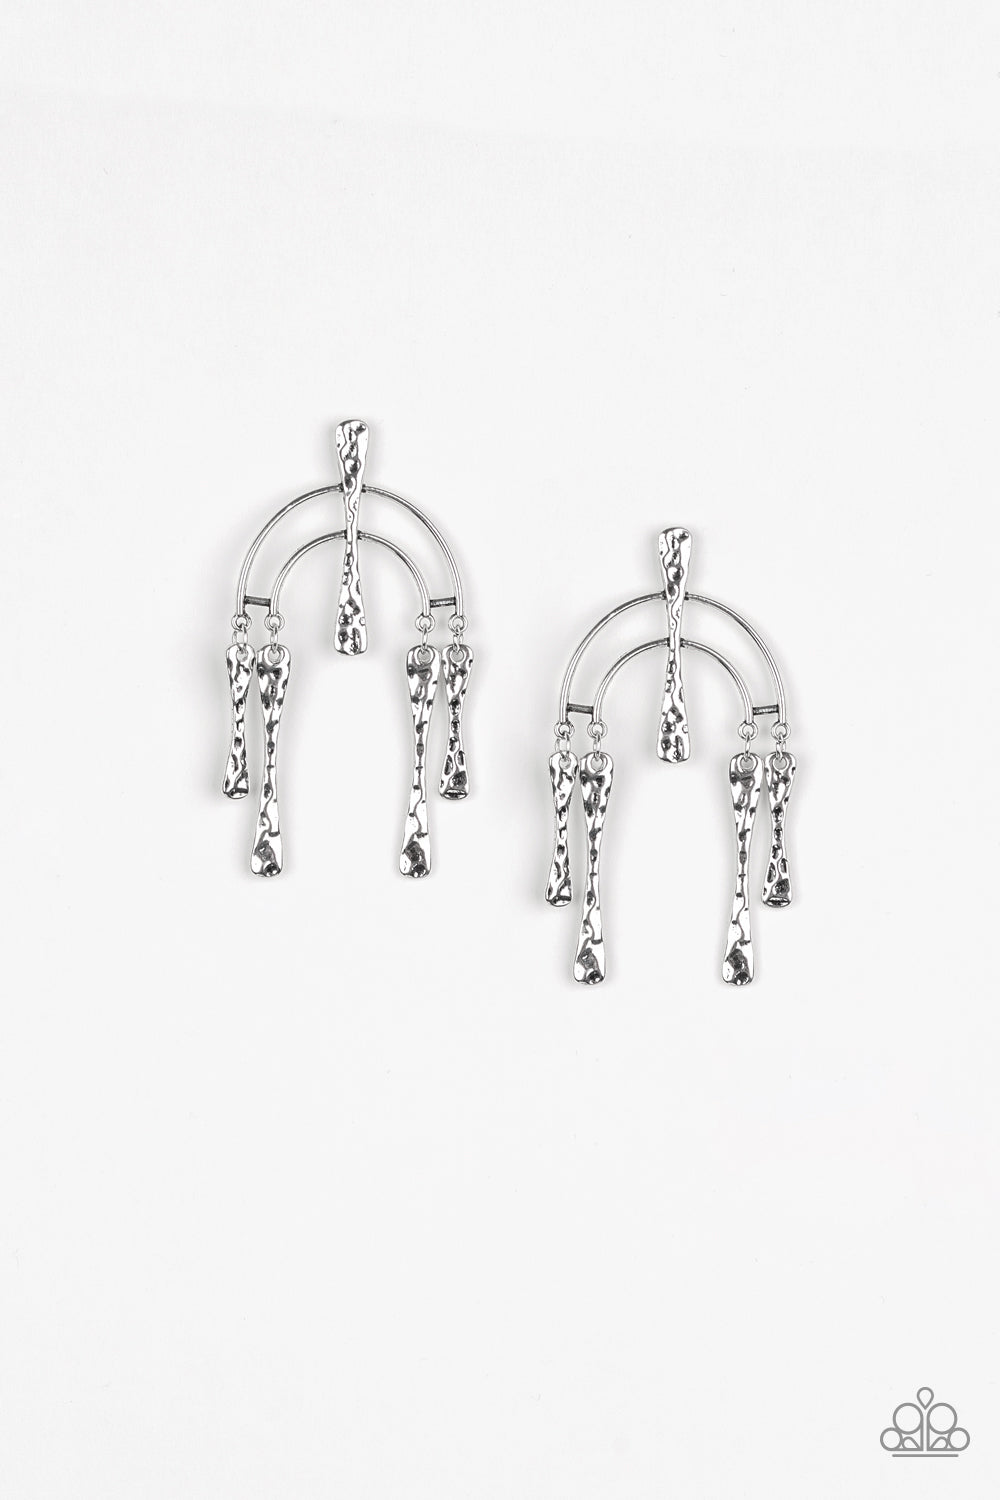 ARTIFACTS Of Life - Silver earrings